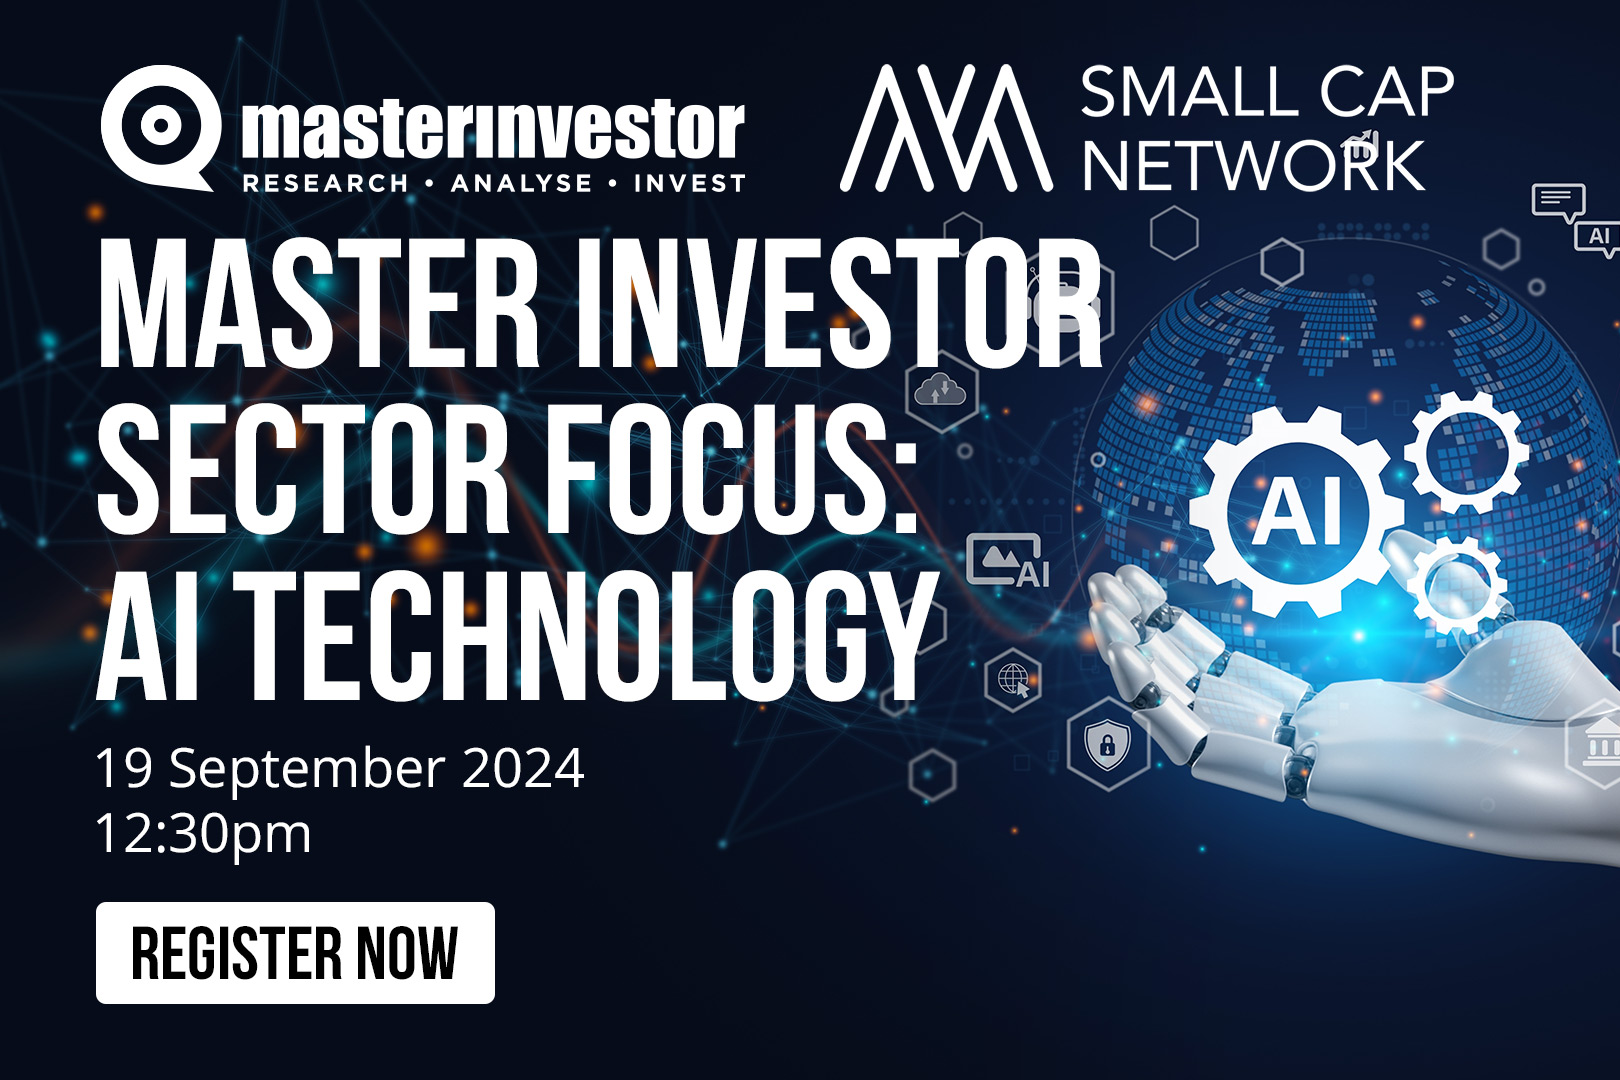 Master Investor Sector Focus: AI Technology